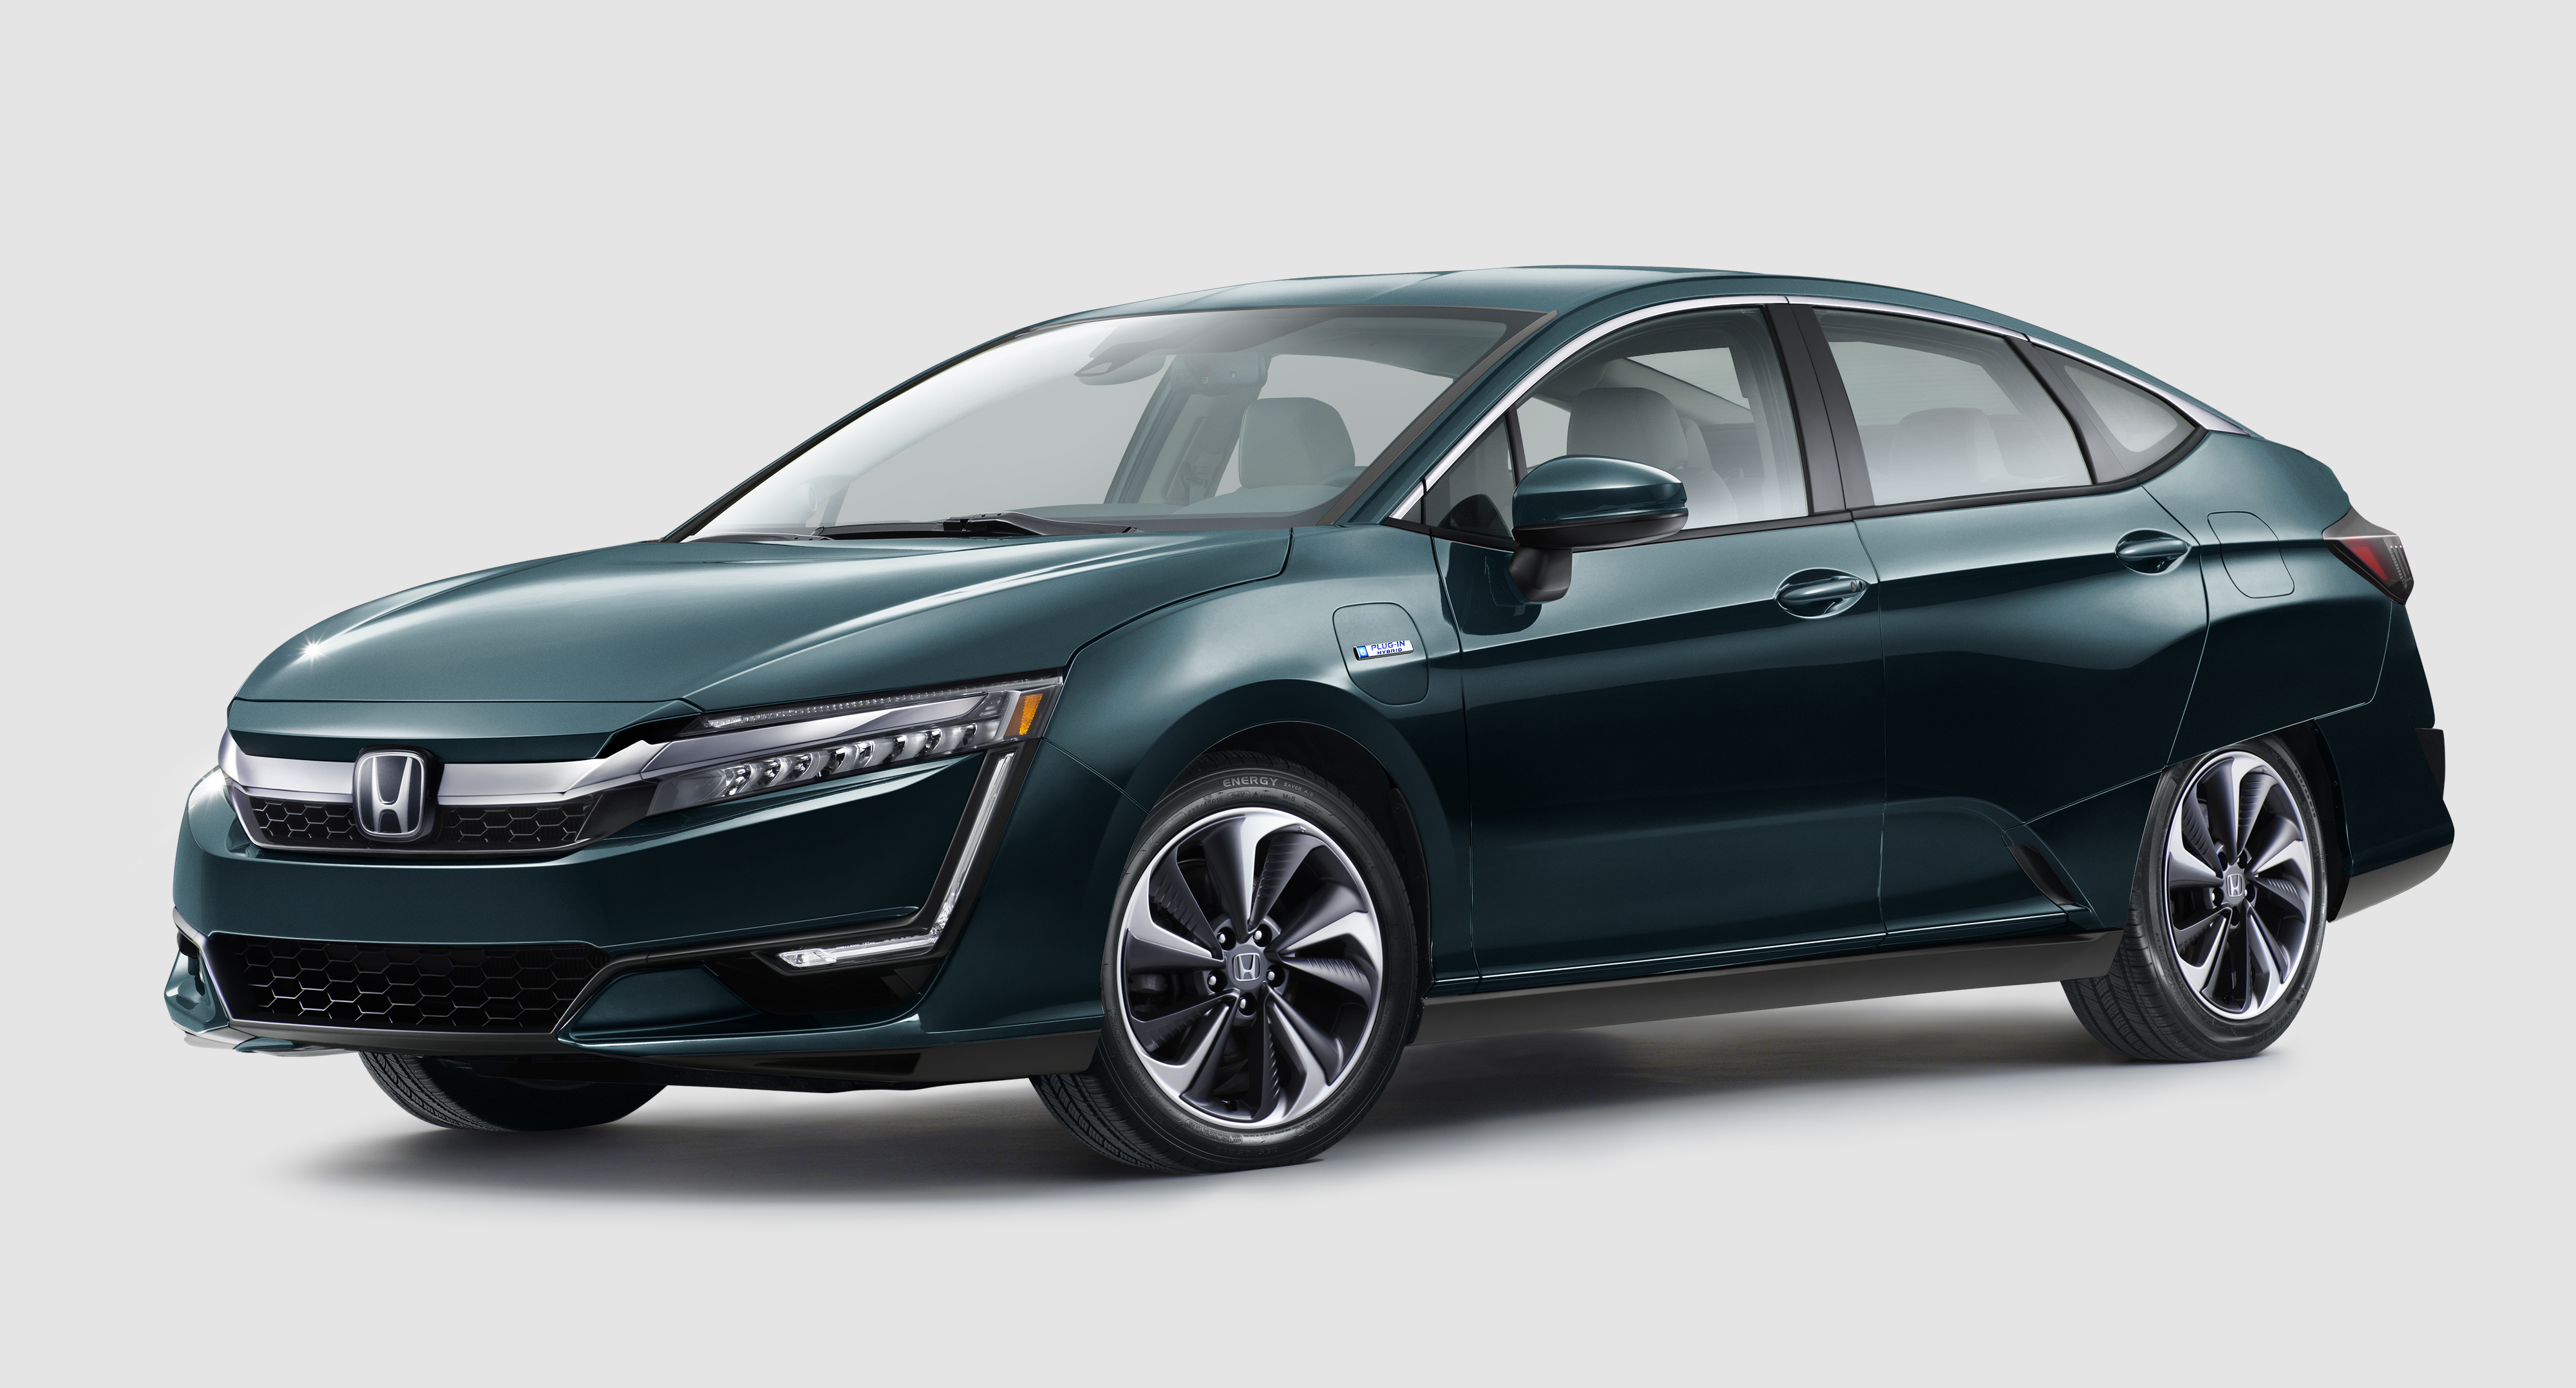 Some Clarity On The Clarity Honda Provides PHEV EV Details The 